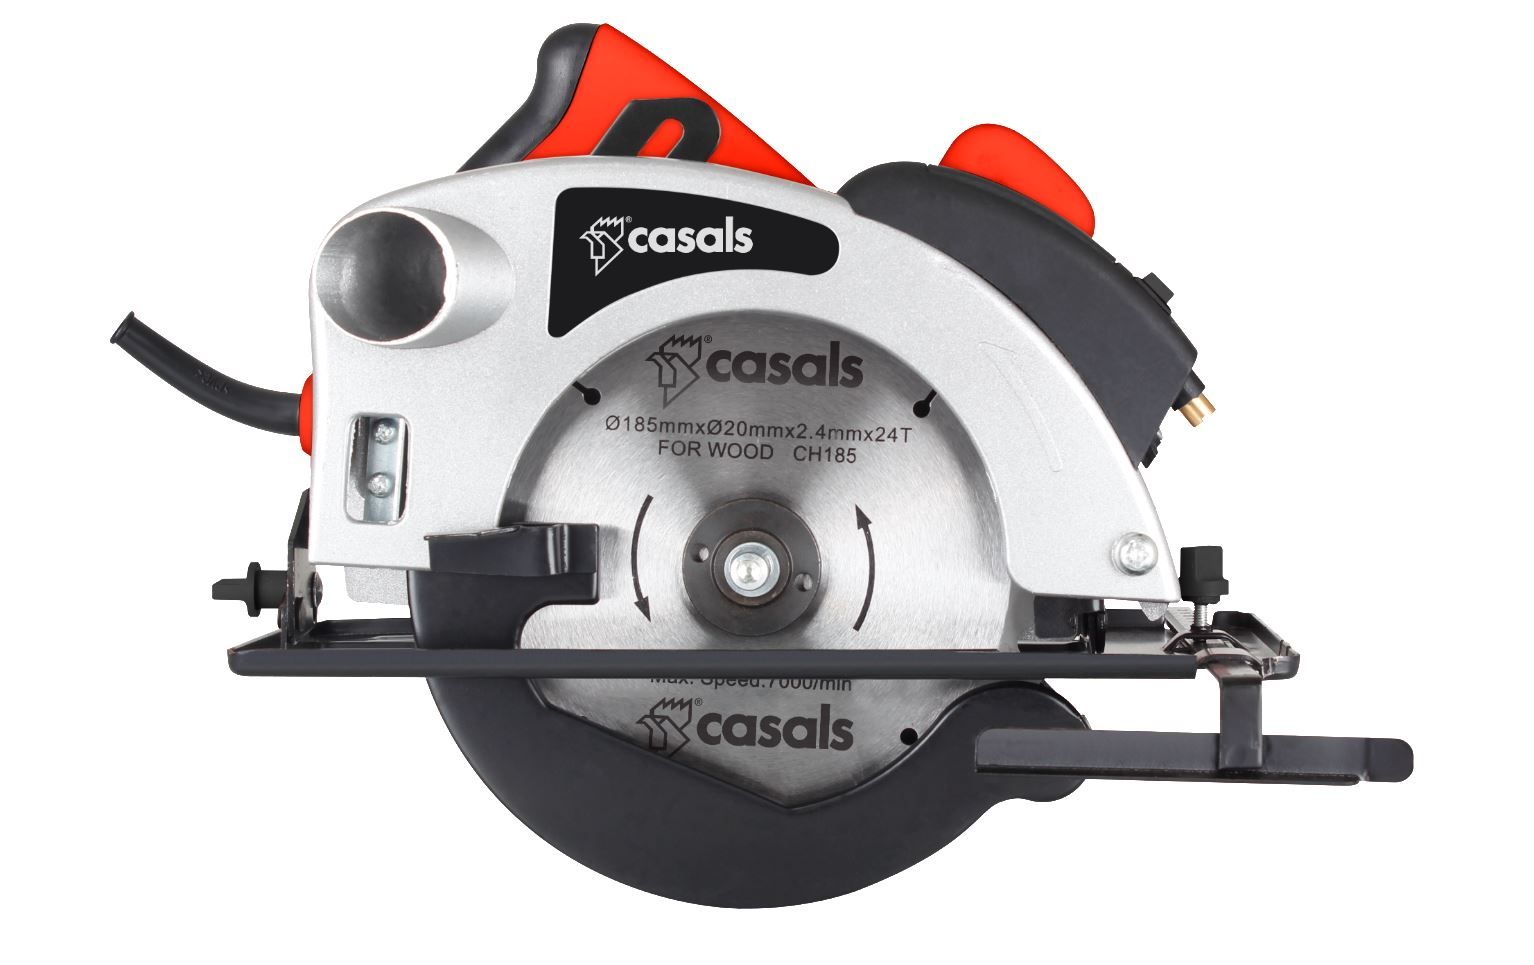 Casals Circular Saw Withaseright Plastic Red 184mm